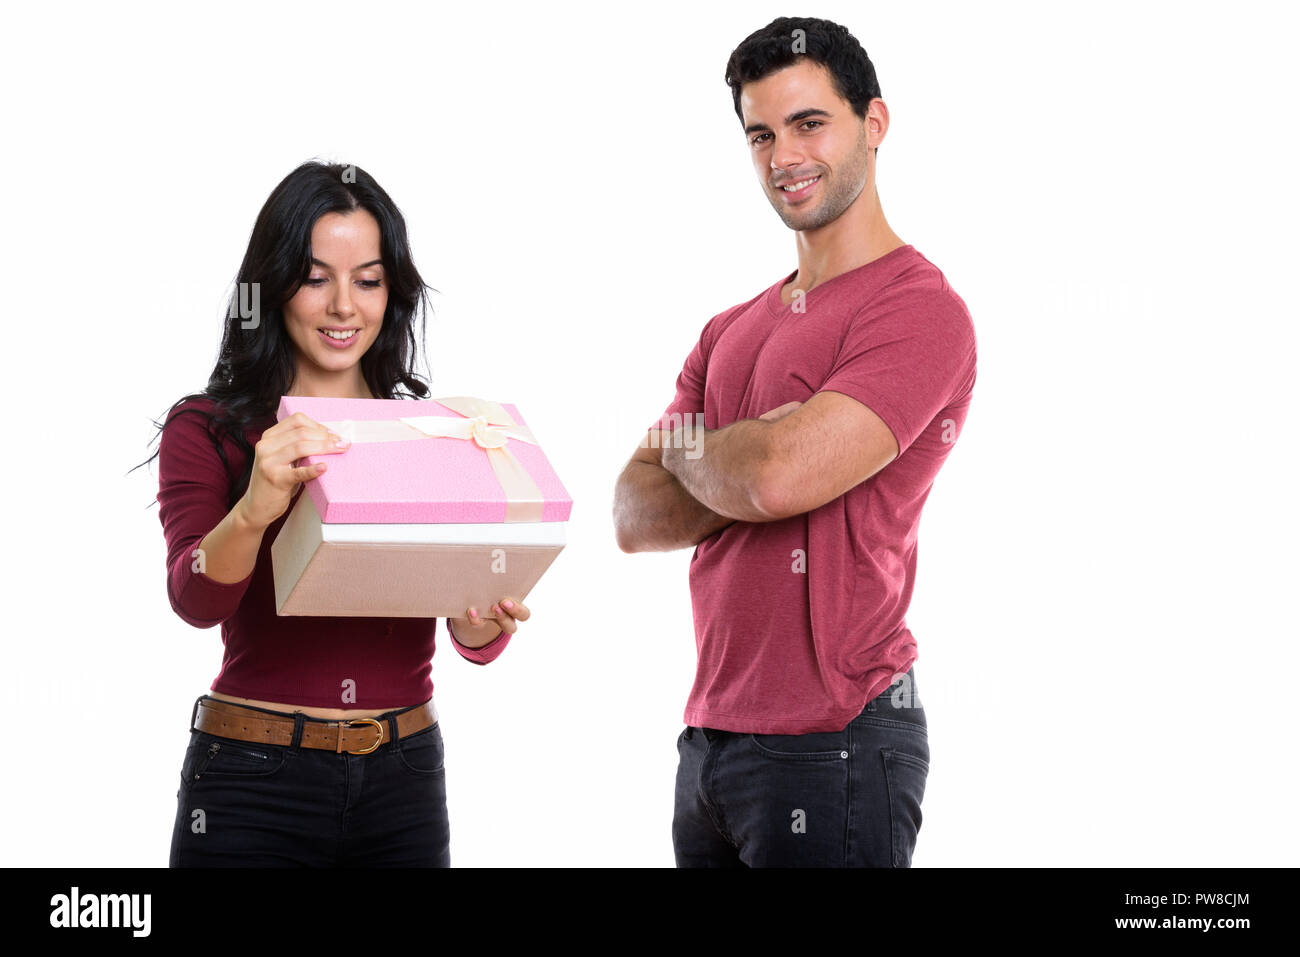 Young happy couple smiling while woman opening gift box et l'homme Banque D'Images